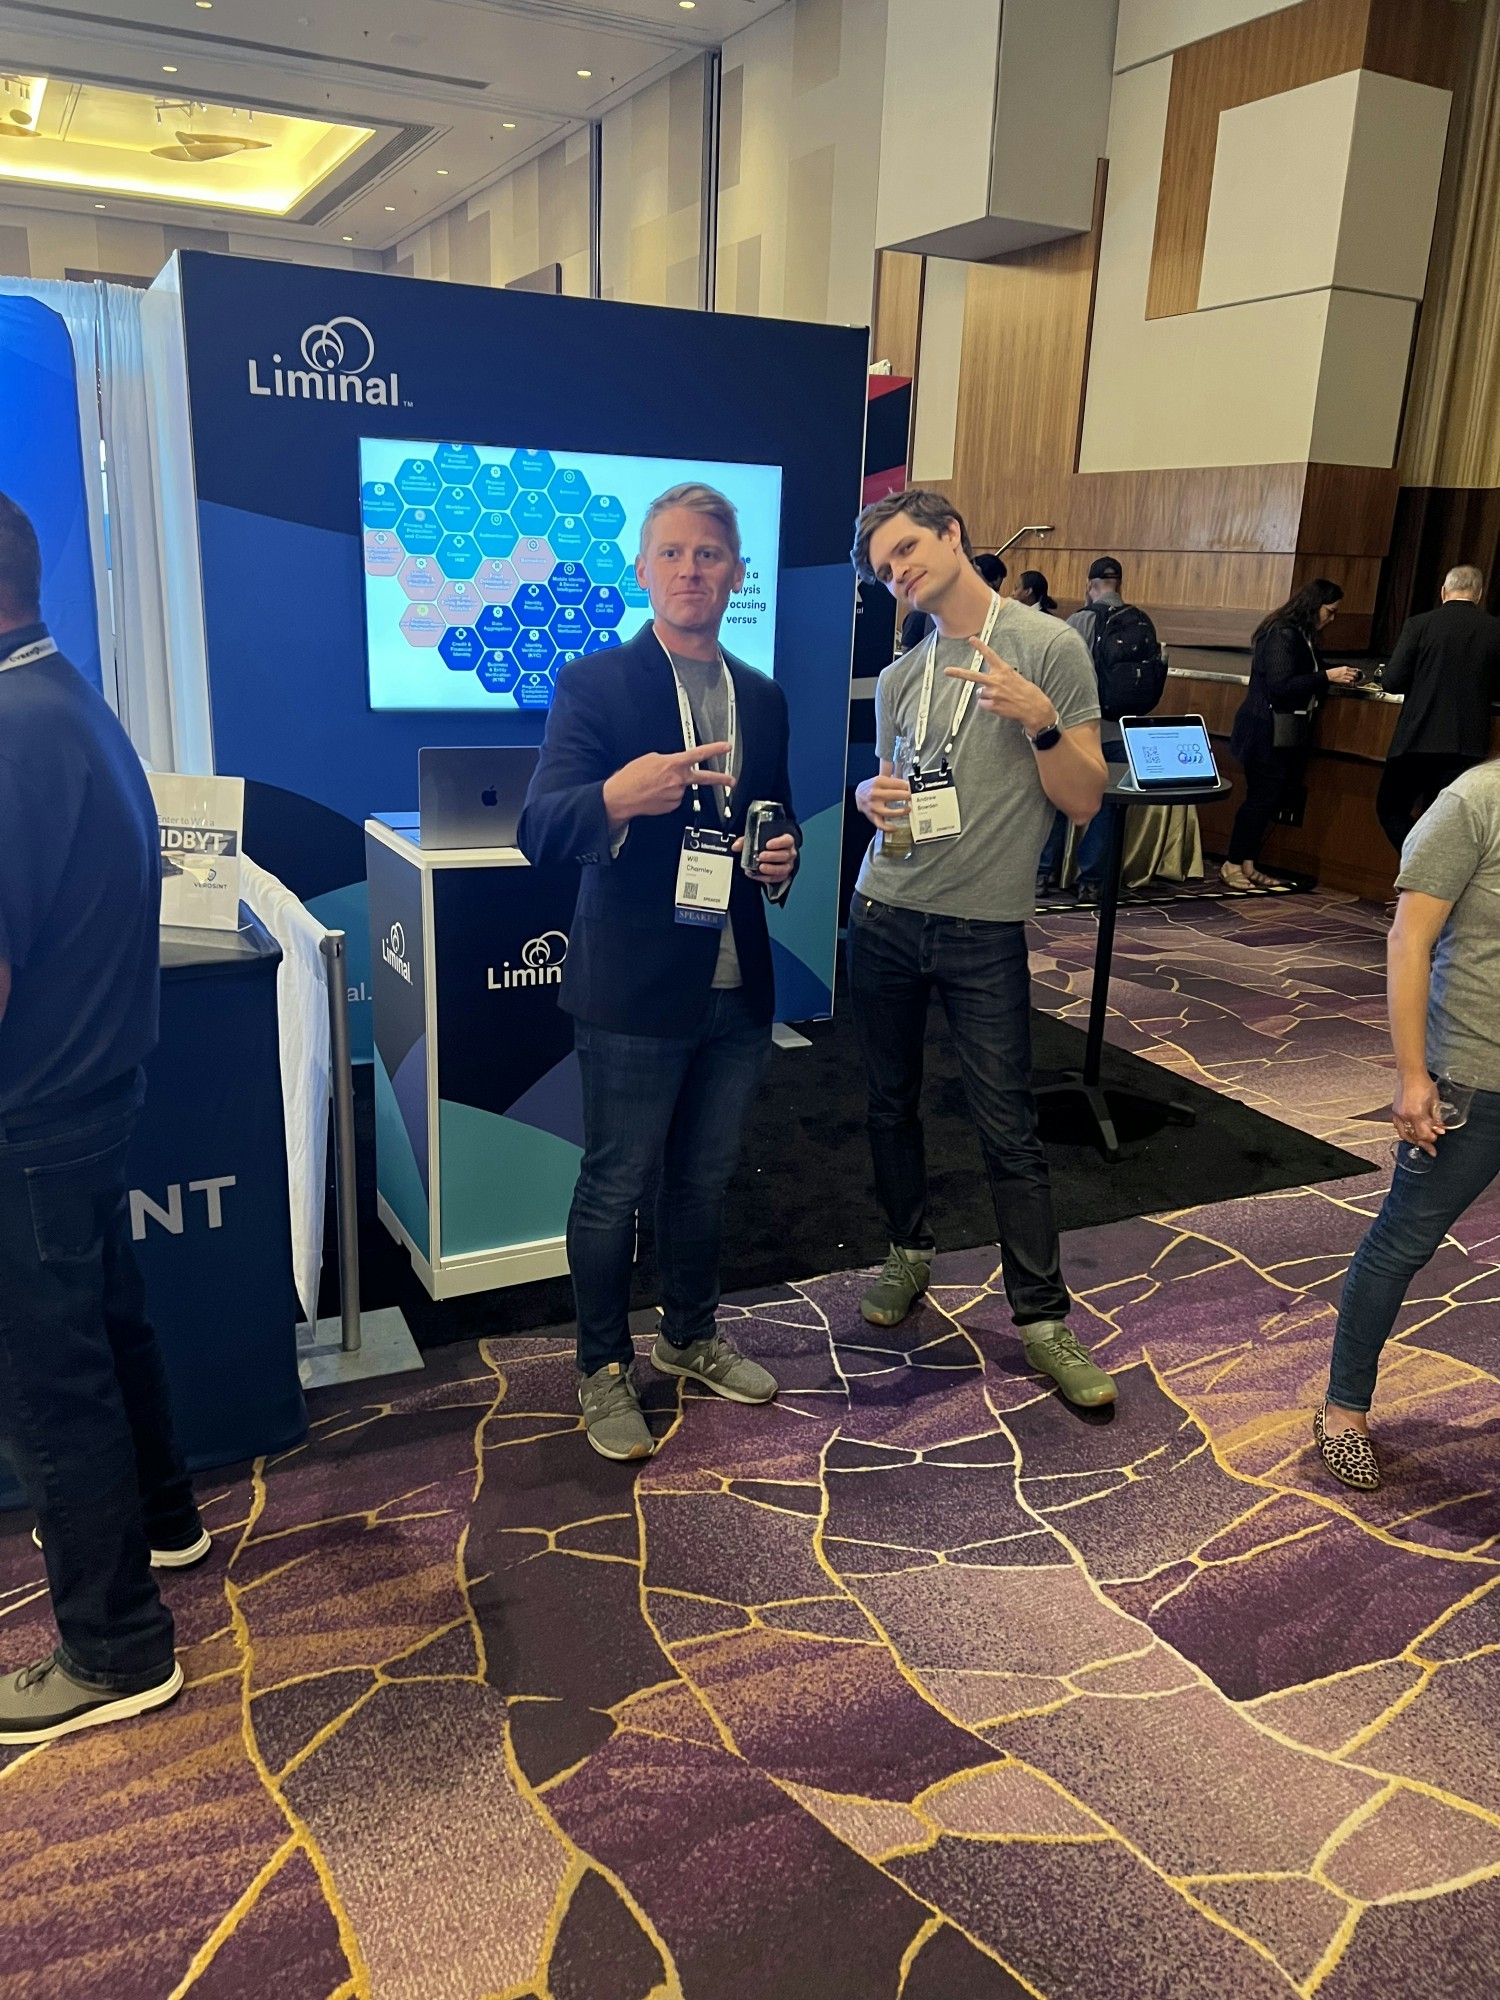 We have a lot of fun representing Liminal at conferences